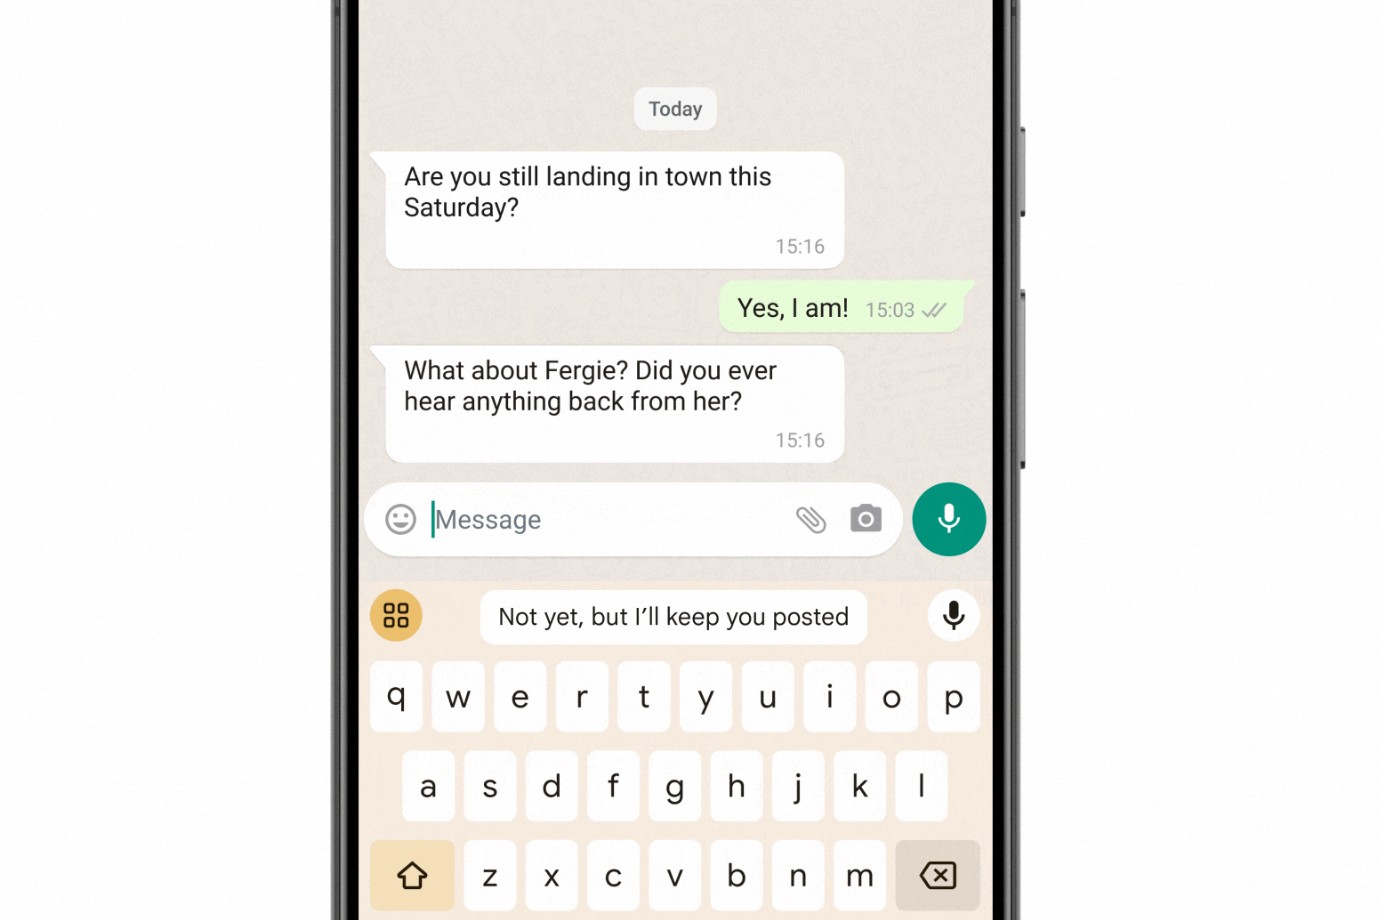 Smart Reply feature in WhatsApp courtesy of Gboard.